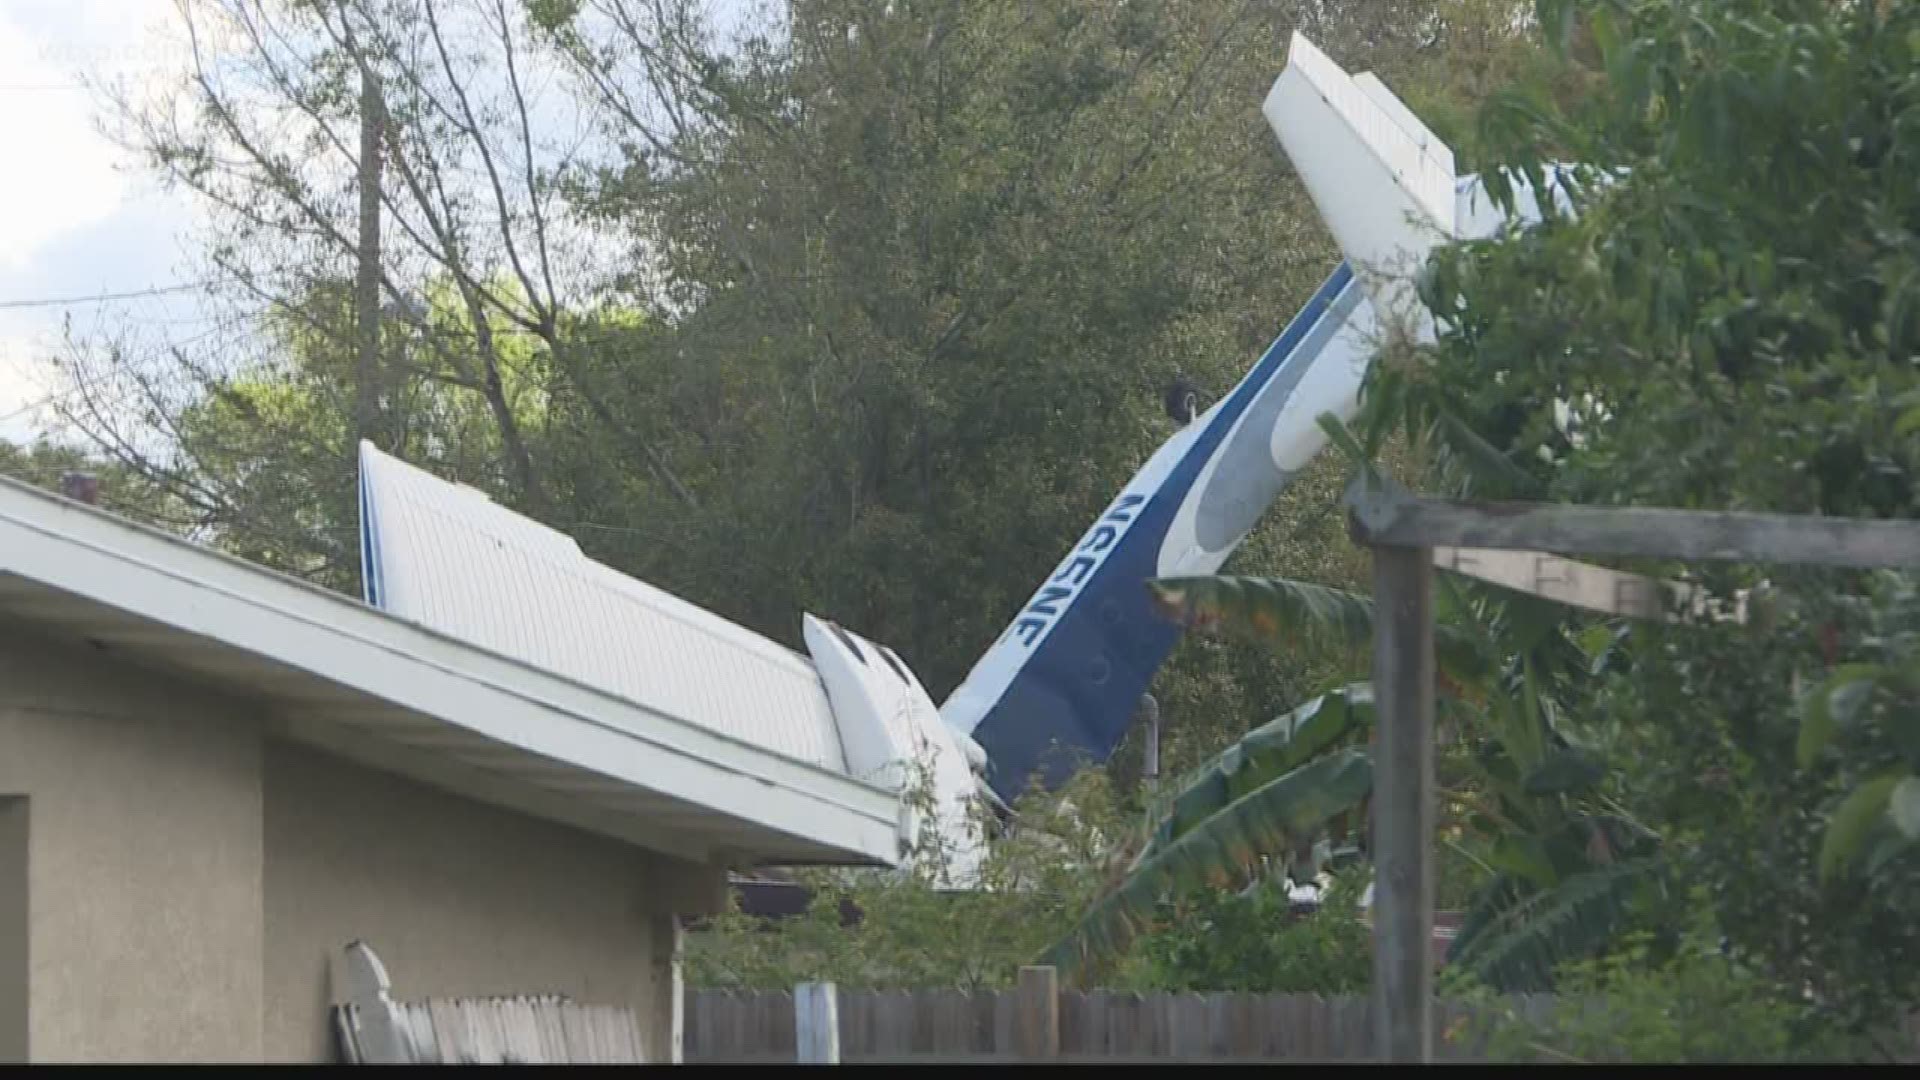 One person was killed when a plane crashed into a Winter Haven home on Idylridge Drive Saturday afternoon.

The instructor on the plane, 64-year-old James Wagner, died in the crash.